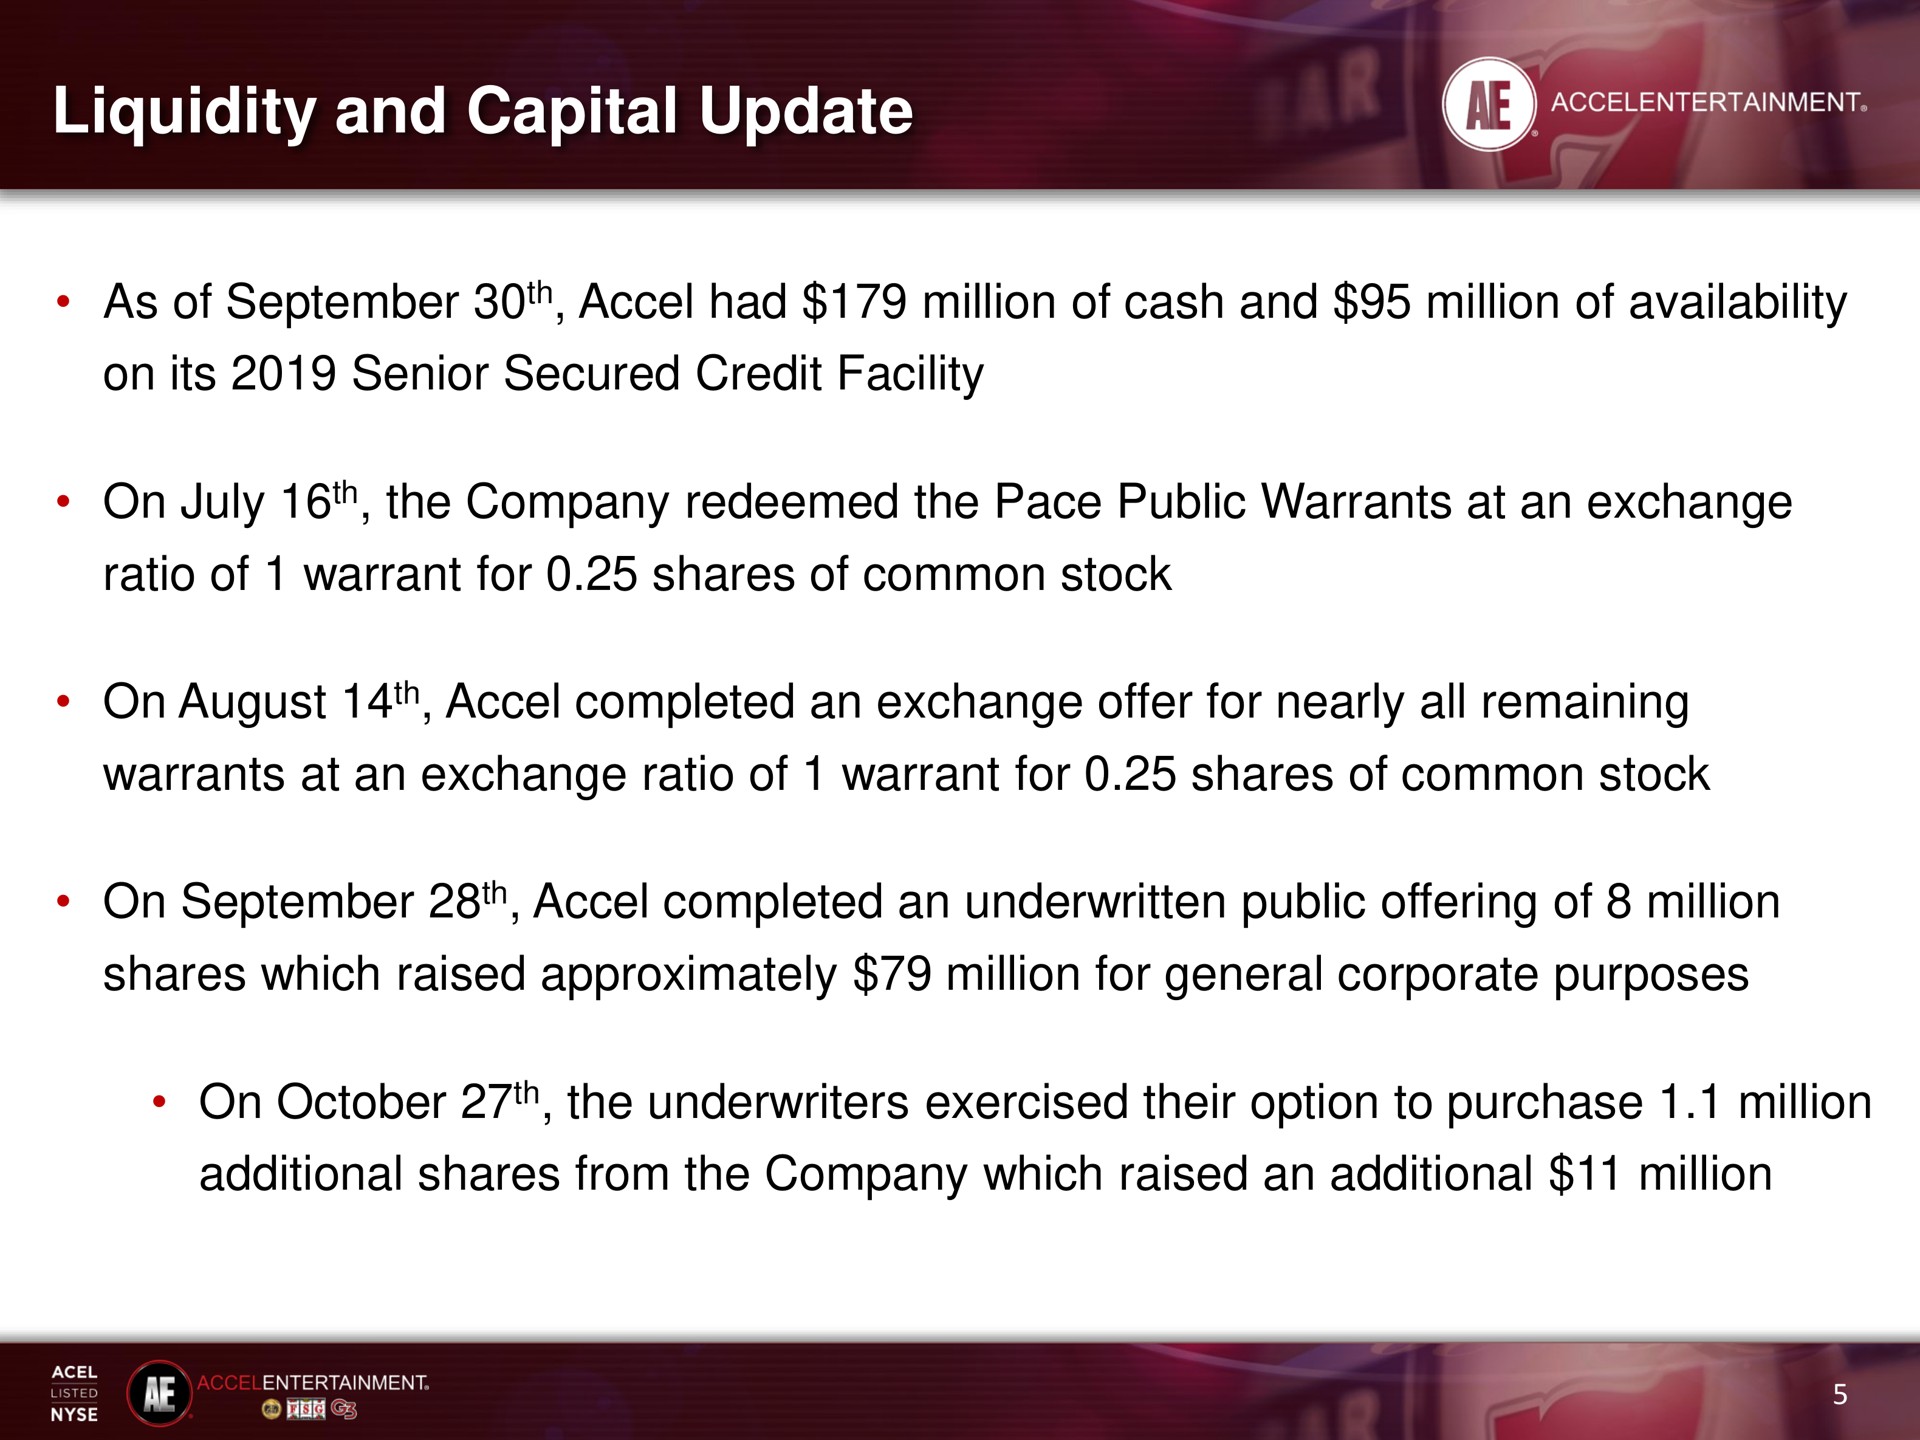 liquidity and capital update as of had million of cash and million of availability on its senior secured credit facility on the company redeemed the pace public warrants at an exchange ratio of warrant for shares of common stock on august completed an exchange offer for nearly all remaining warrants at an exchange ratio of warrant for shares of common stock on completed an underwritten public offering of million shares which raised approximately million for general corporate purposes on the underwriters exercised their option to purchase million additional shares from the company which raised an additional million | Accel Entertaiment